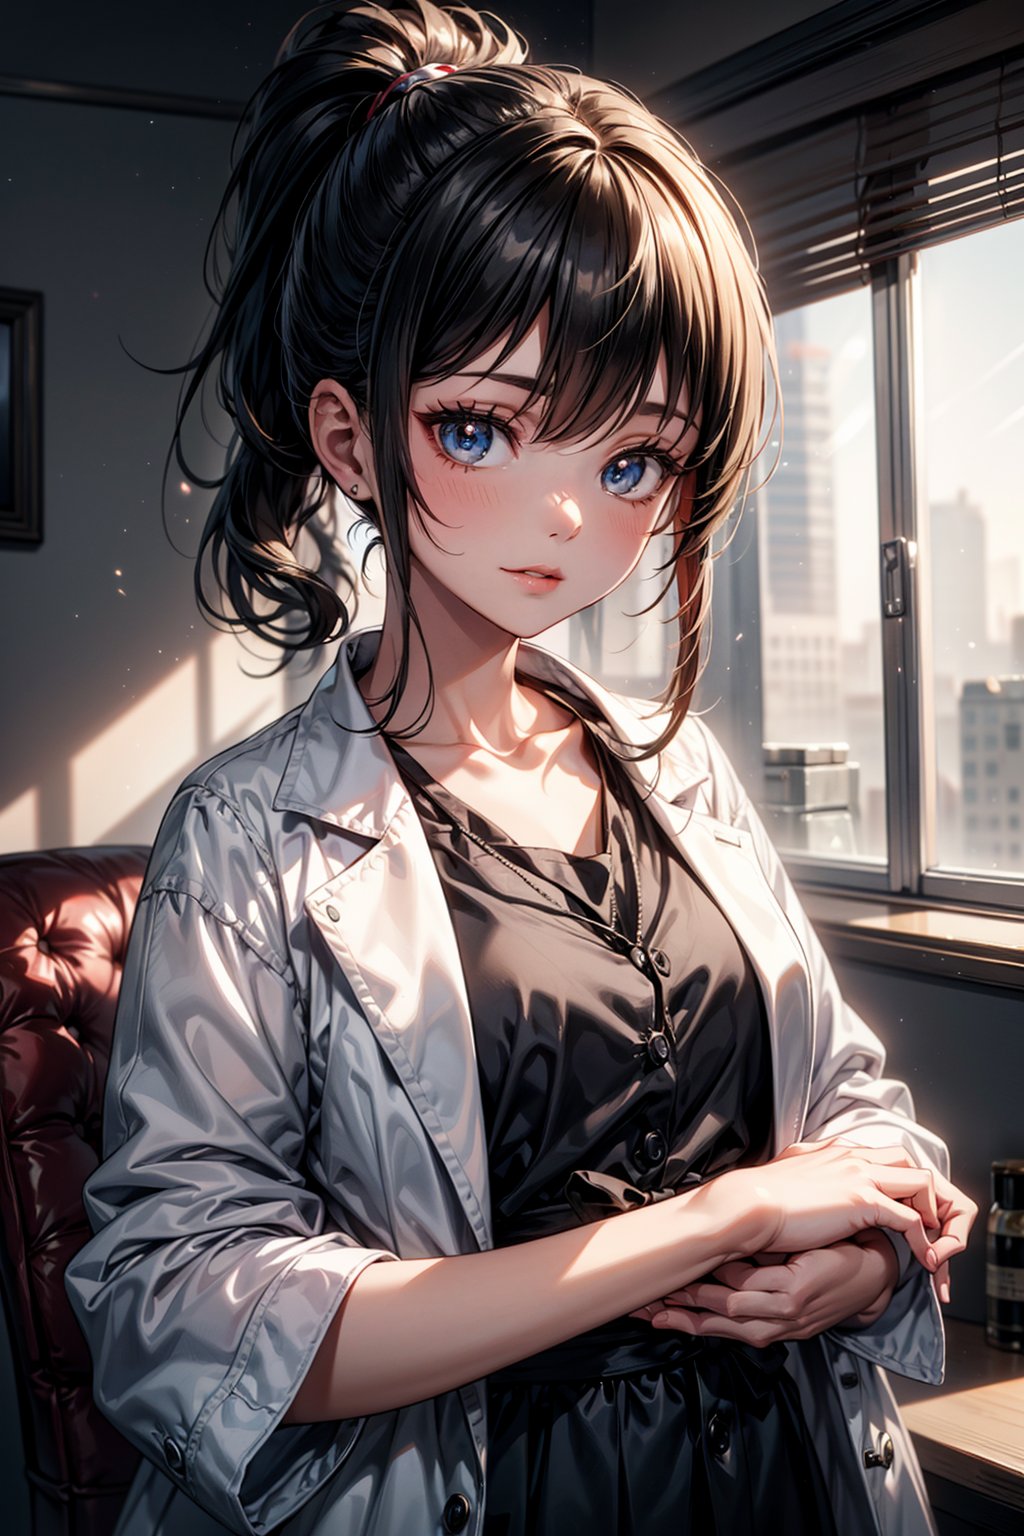 Render a masterpiece of a 16-year-old girl with a ponytail hairstyle, wearing a white shirt under a female doctor's coat, gazing directly at the viewer with a subtle 0.4 slight smile. The face is highly detailed, with perfect shiny skin and intricate eye features. Perfect lighting casts dramatic shadows, achieved through advanced ray tracing techniques. The upper body is in sharp focus, showcasing the subject's youthful charm.,anime